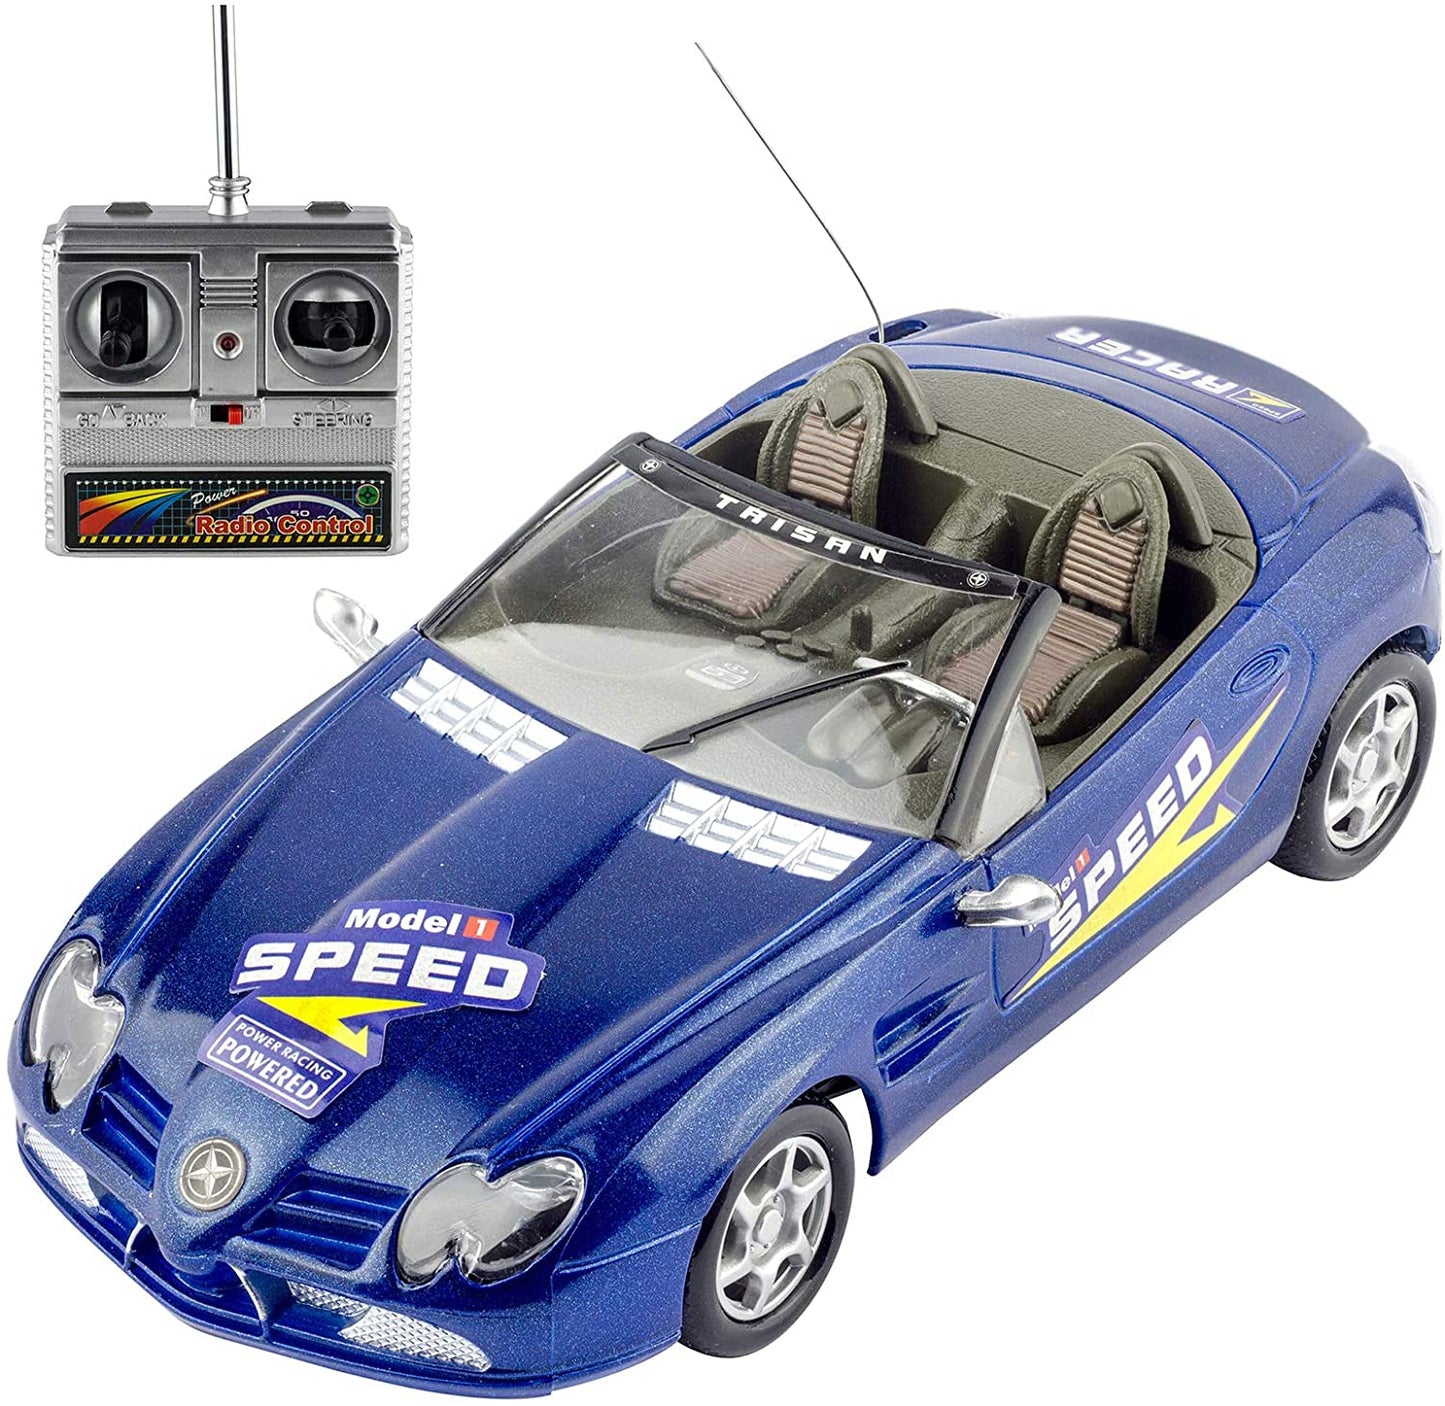 Liberty Imports Super RC Remote Radio Control Convertible Toy Race Car - 1:18 RTR Sports Coupe Vehicle Model Racer (Colors Vary) | Decor Gifts and More